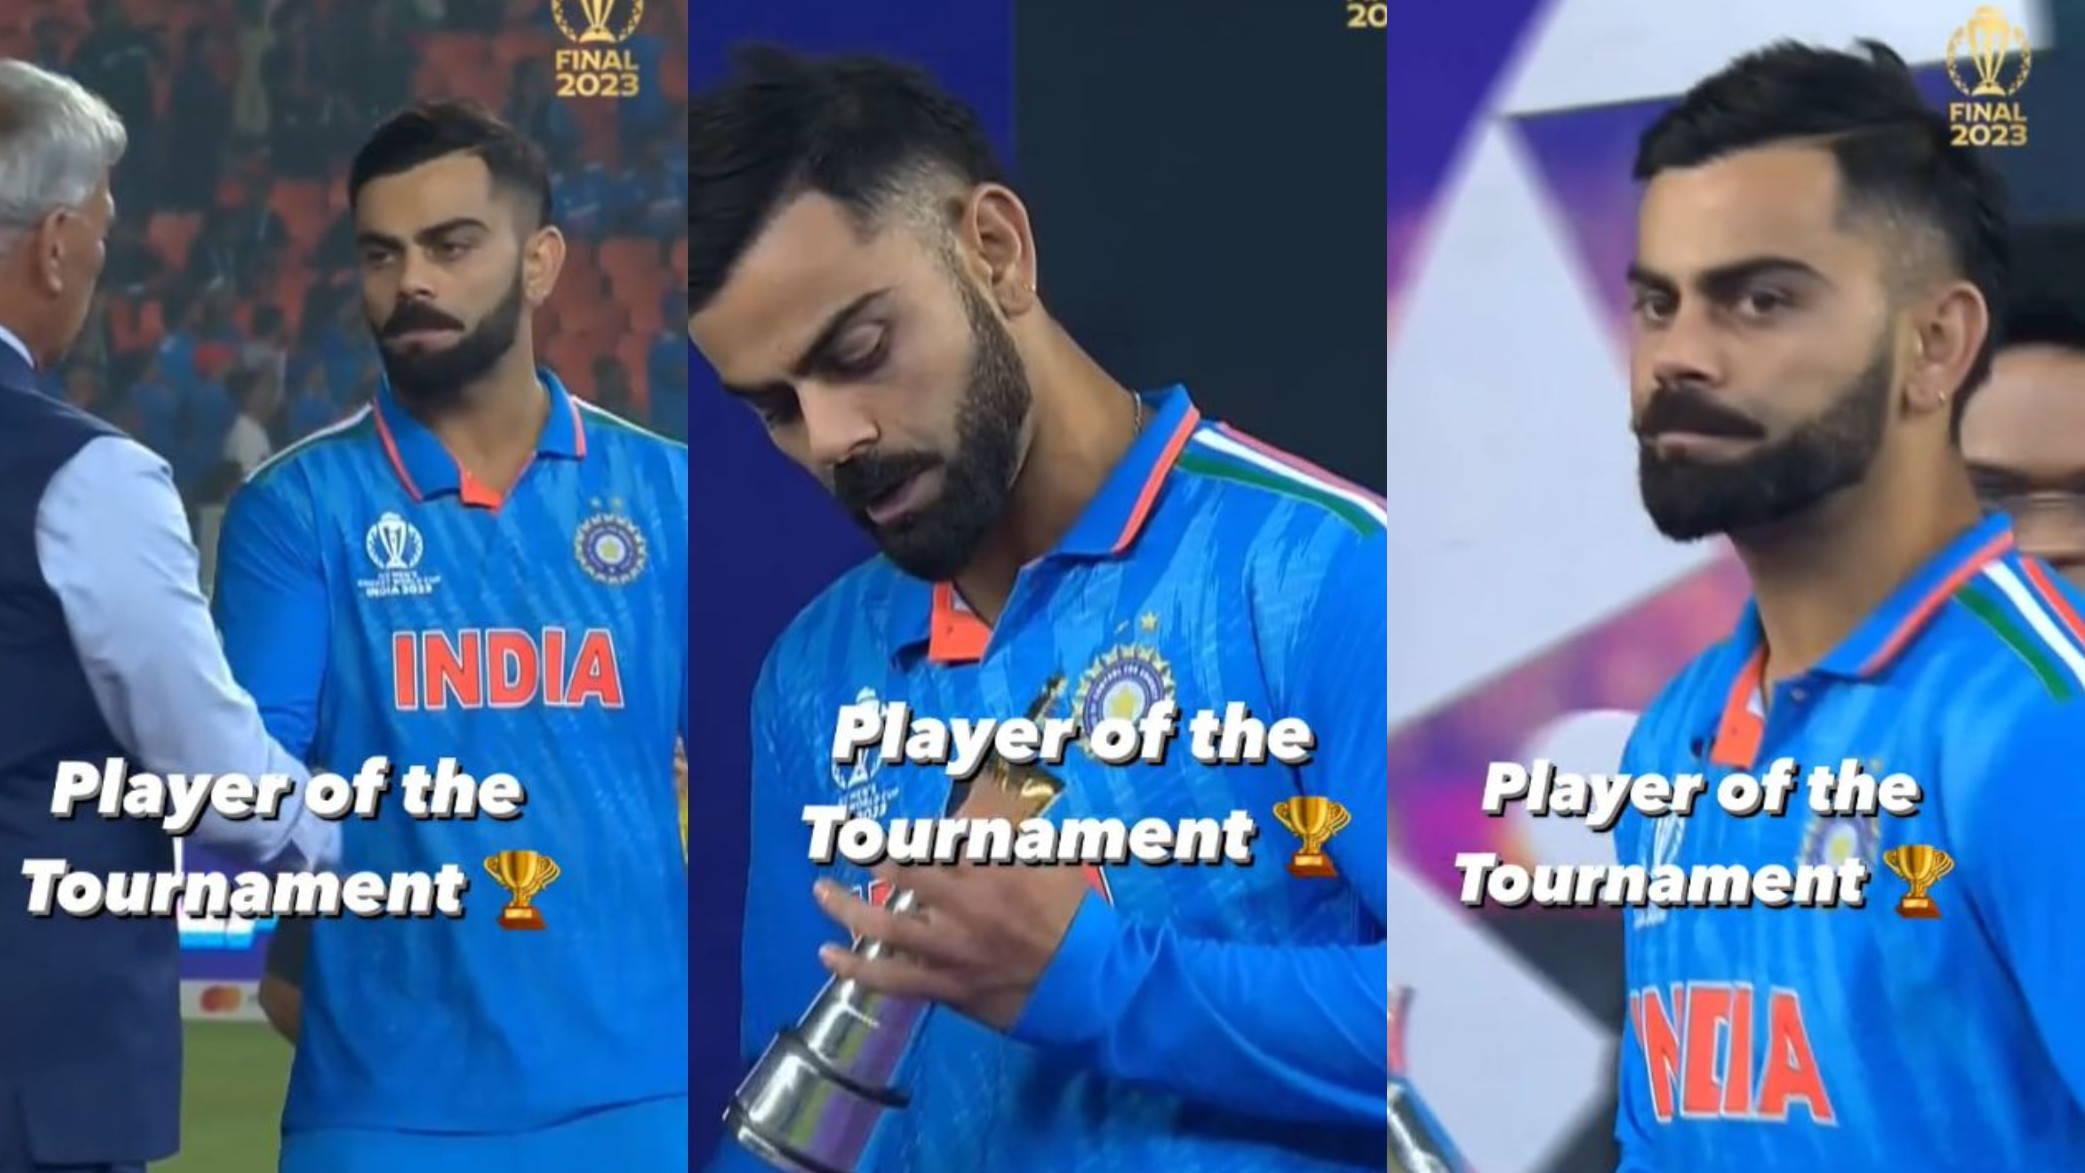 CWC 2023: WATCH- Virat Kohli collects his Player of the Tournament trophy with a glum face